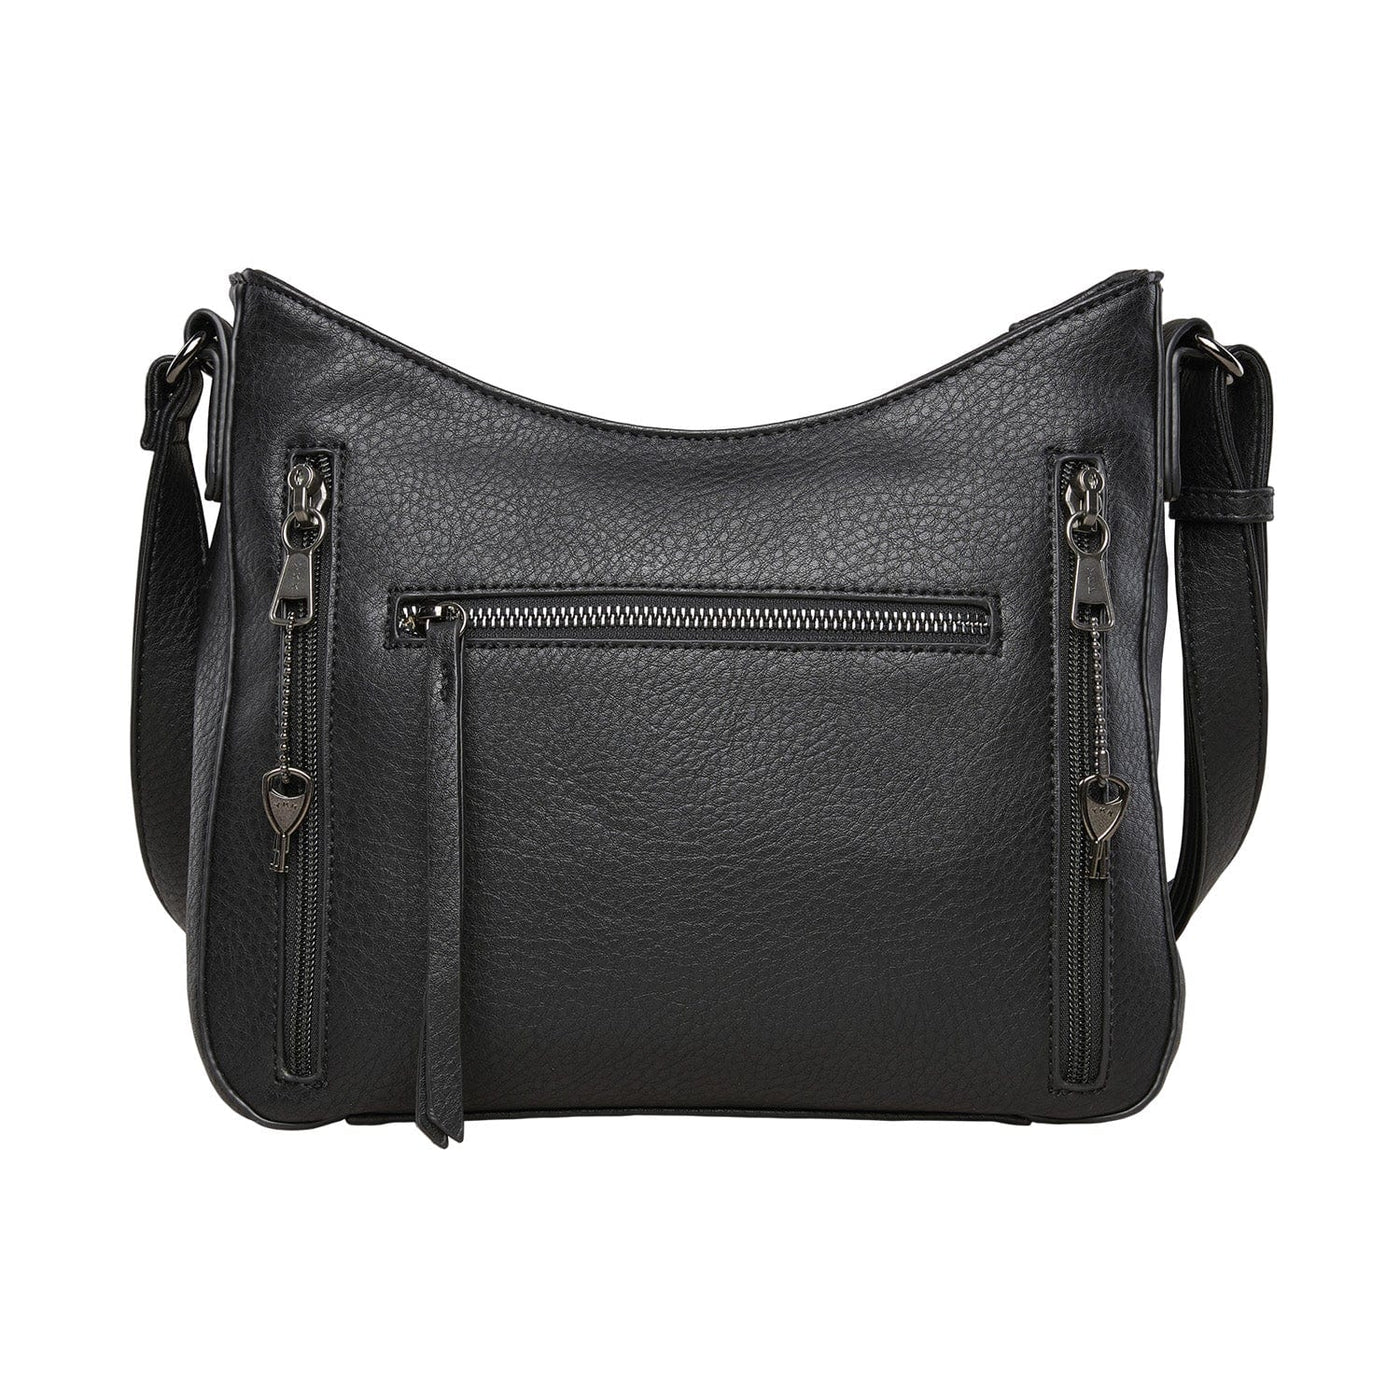 Concealed Carry Emery Crossbody Bag with RFID Slim Wallet by Lady Conceal